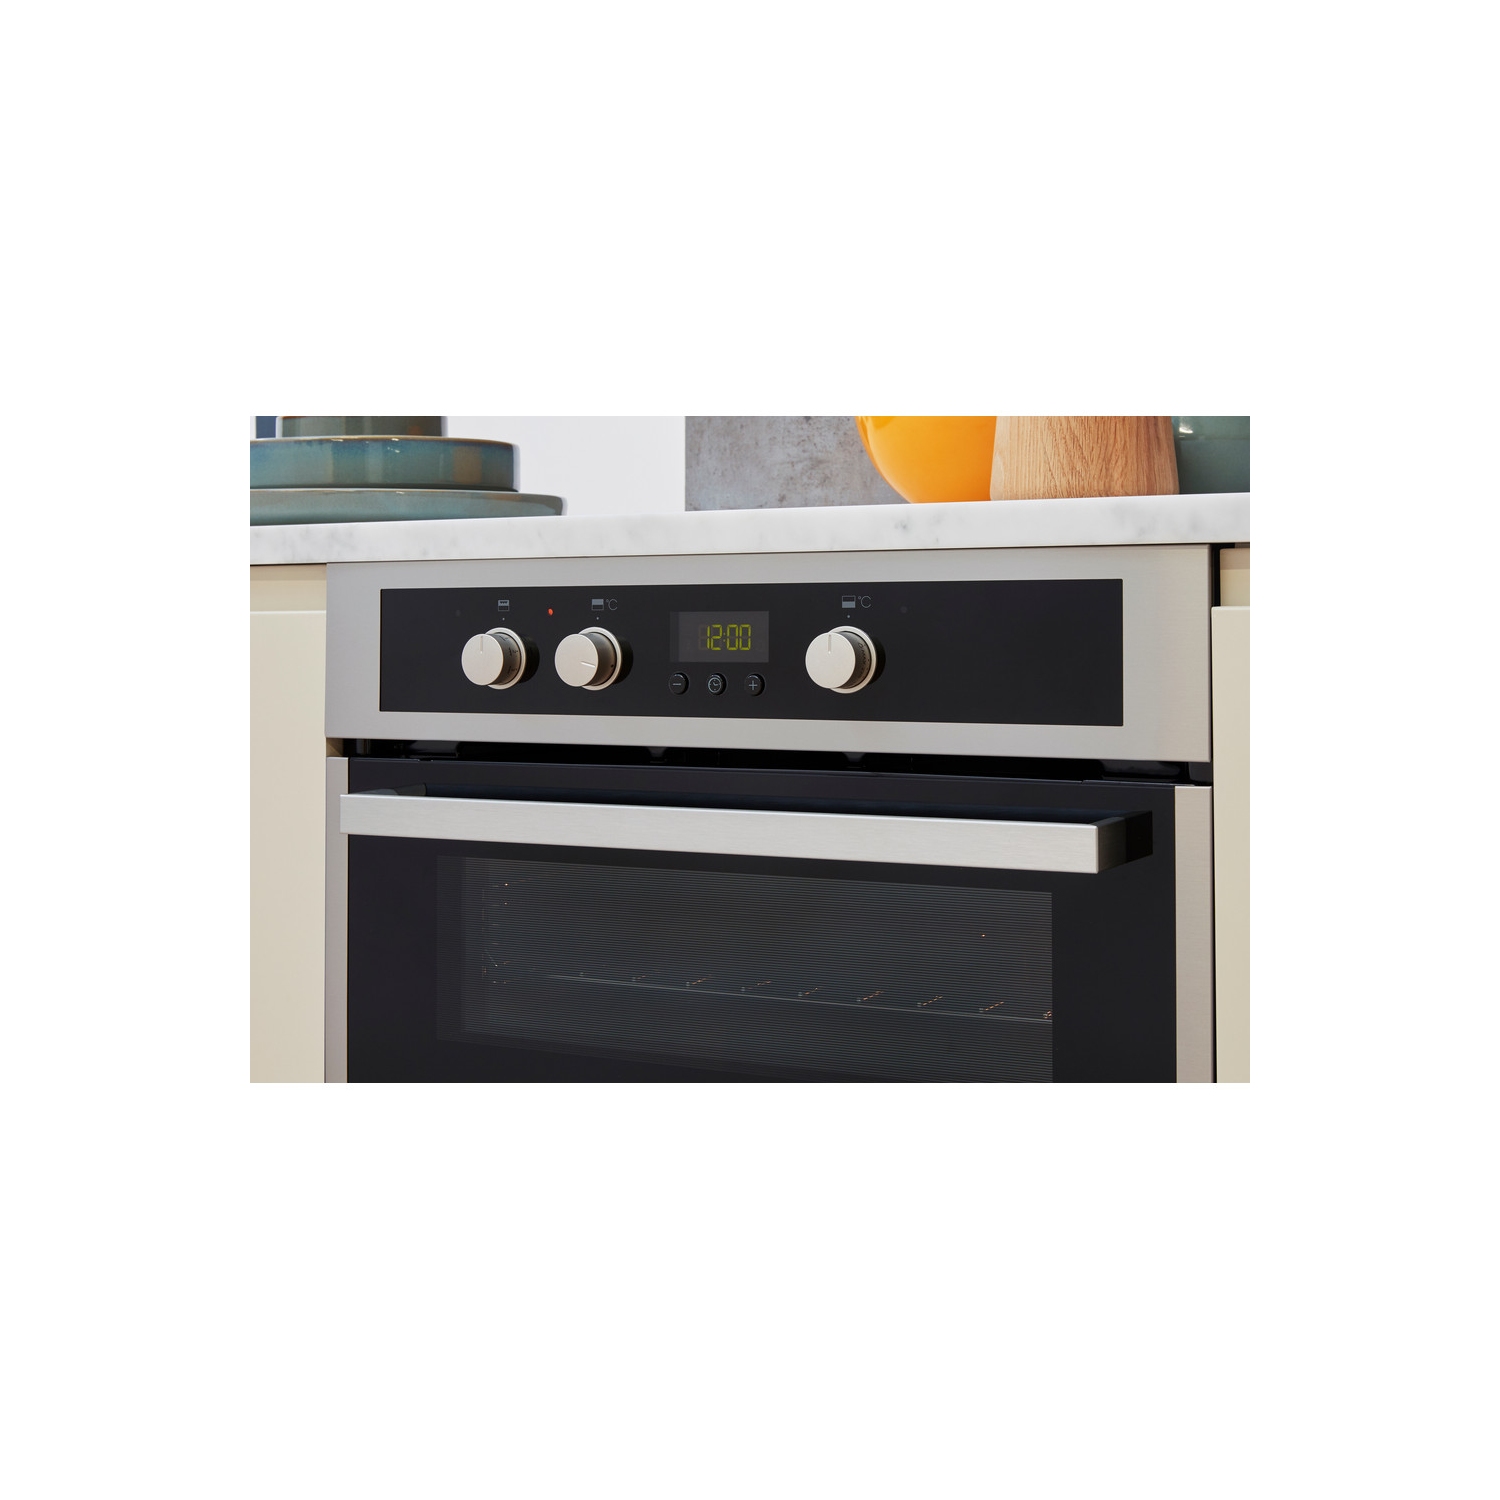 Whirlpool 60cm Built-Under Electric Oven - Stainless Steel - A Rated - 7